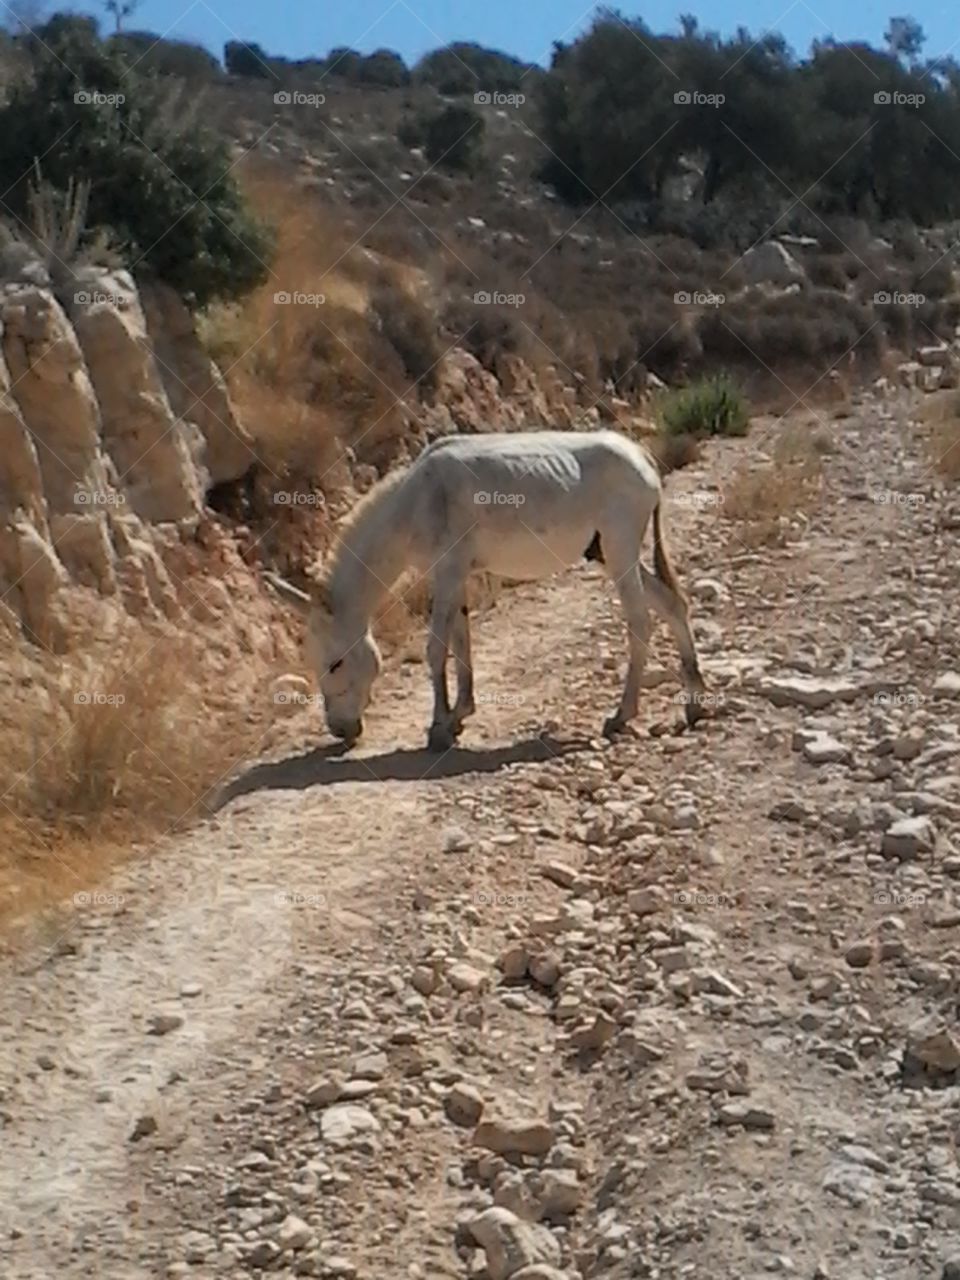 donkey in hebron. i took this picture while i was at my hometown in hebron. i found a loose donkey. couldn't resist but to take a picture of it